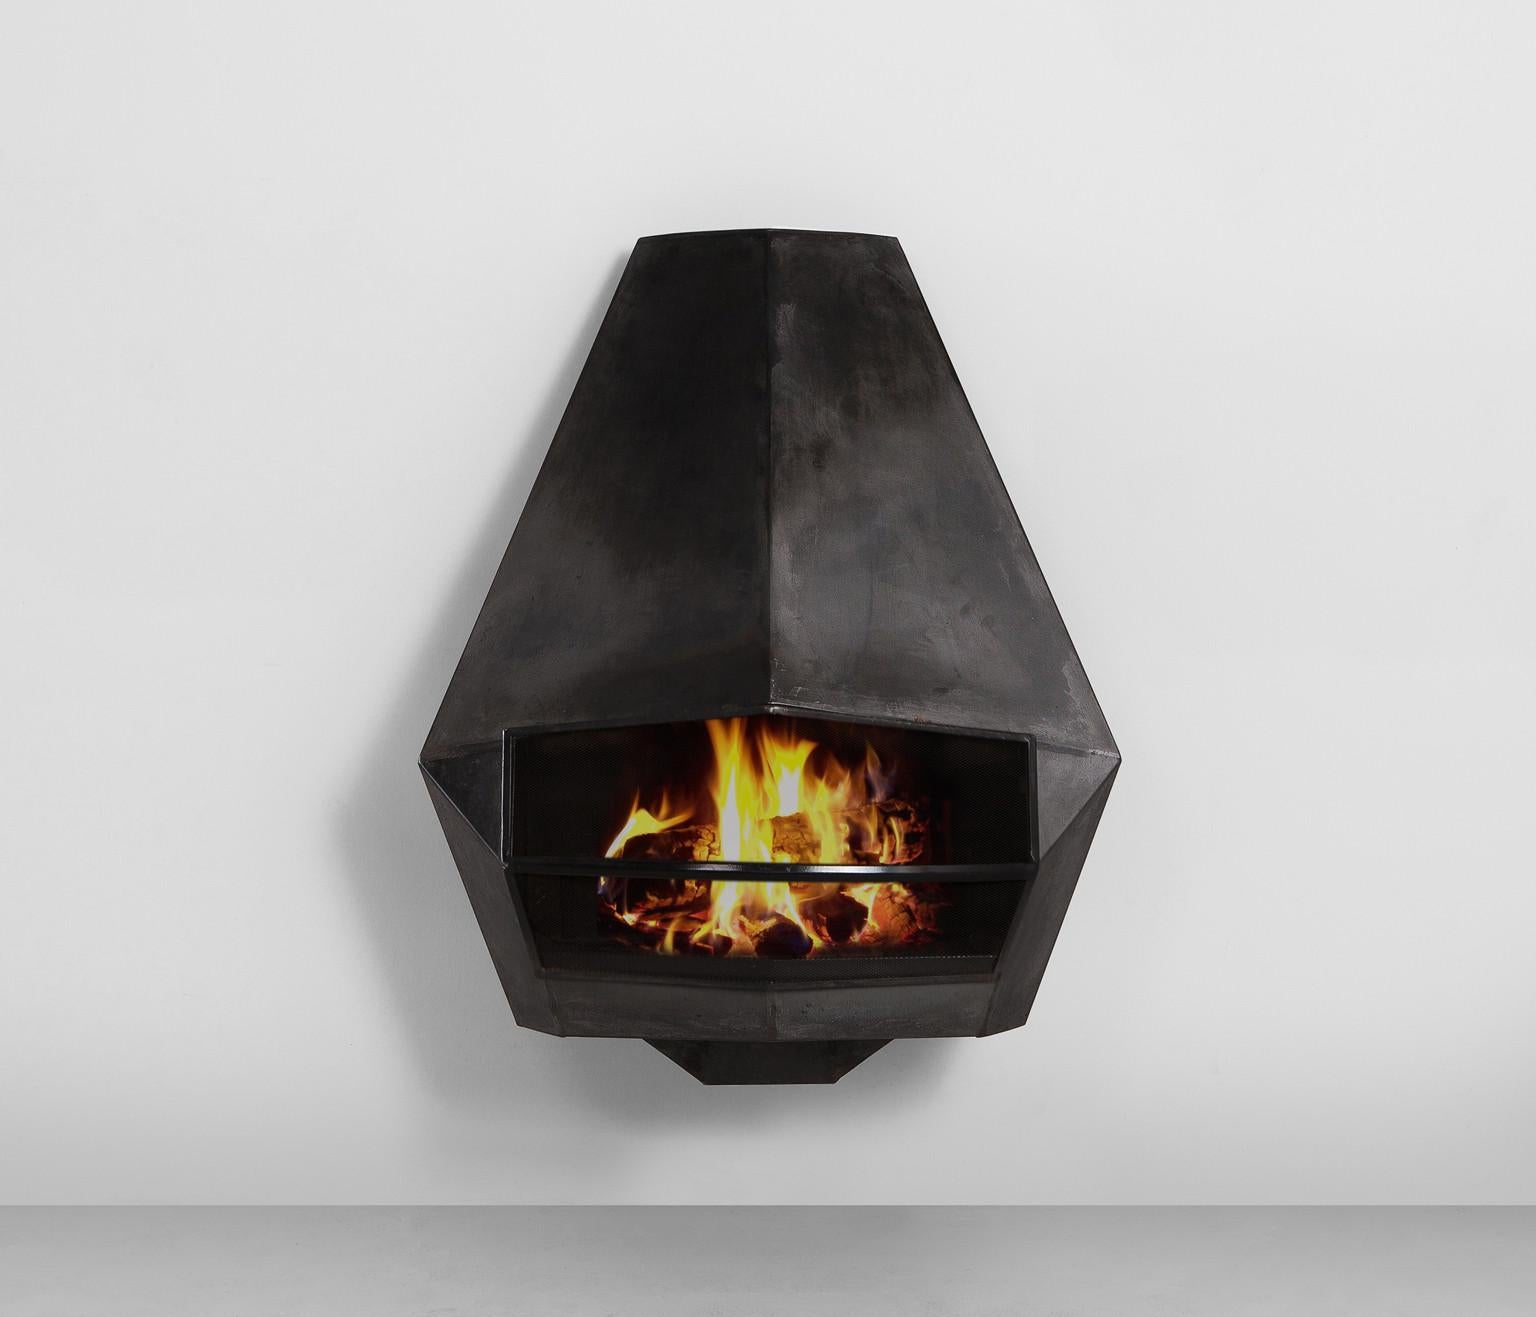 Fire place, sheet steel, Belgium, 1980s.

A well-designed fire place executed in sheet steel fits perfectly in the focal point of the room or can be placed in the middle against the wall. The whole design is based on an open construction established